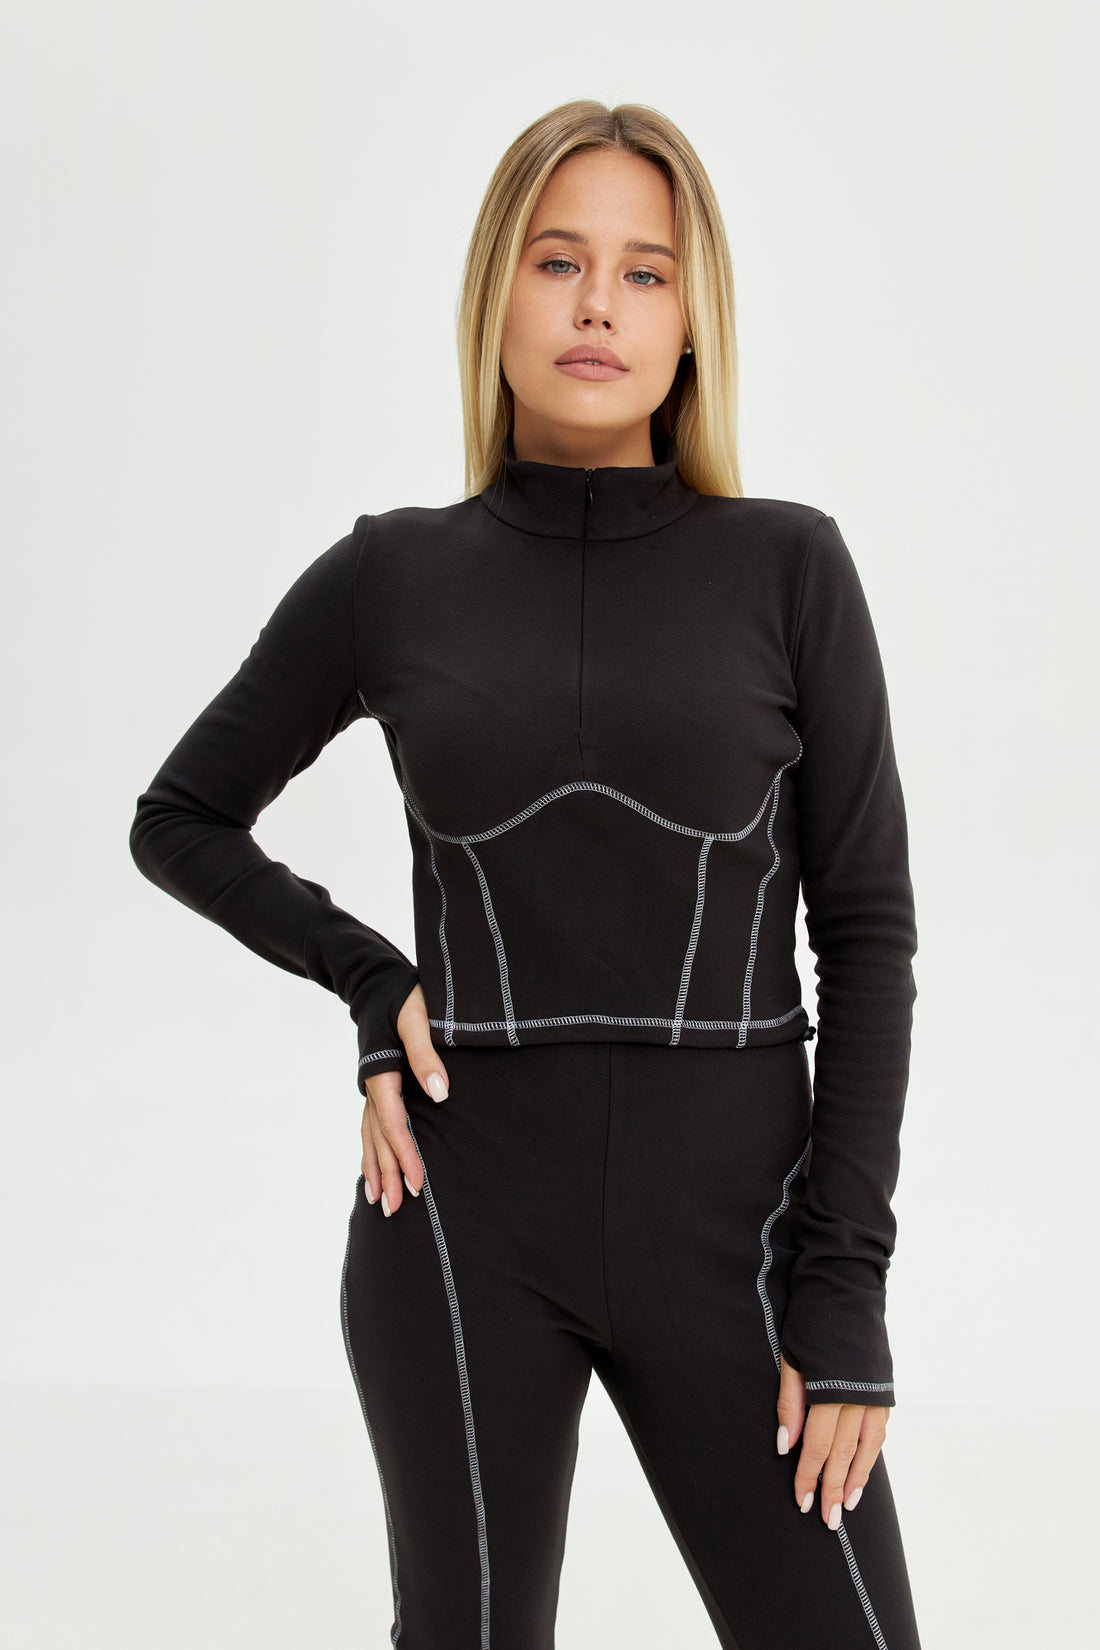 Skiing base layer women's - Black two piece set long johnes - Best thermal tops